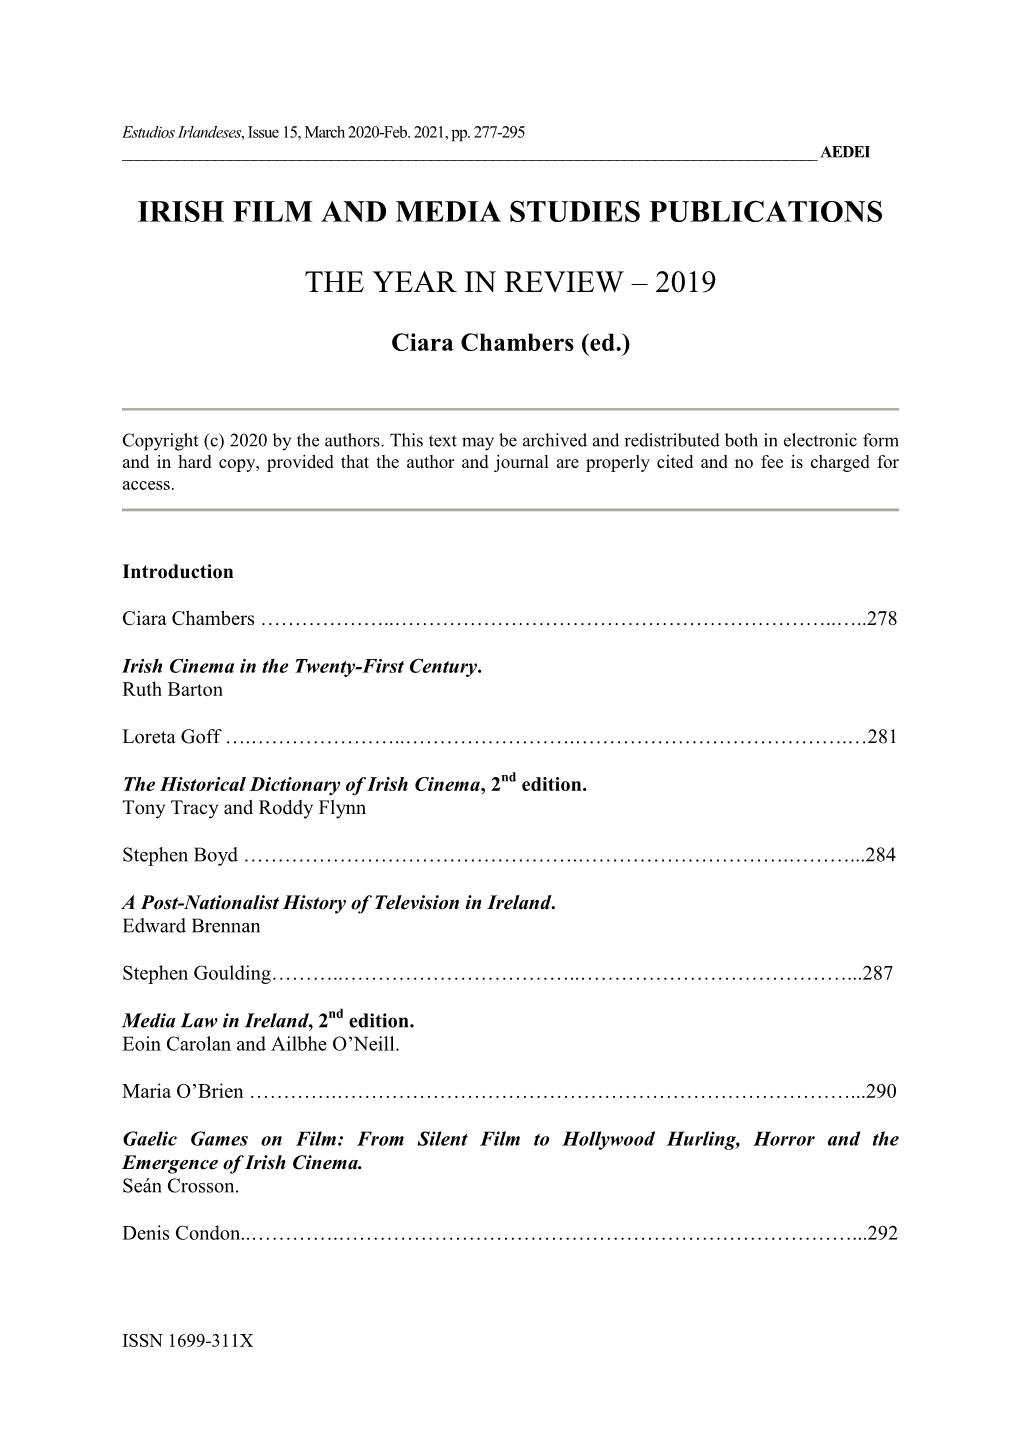 Irish Film and Media Studies Publications the Year In